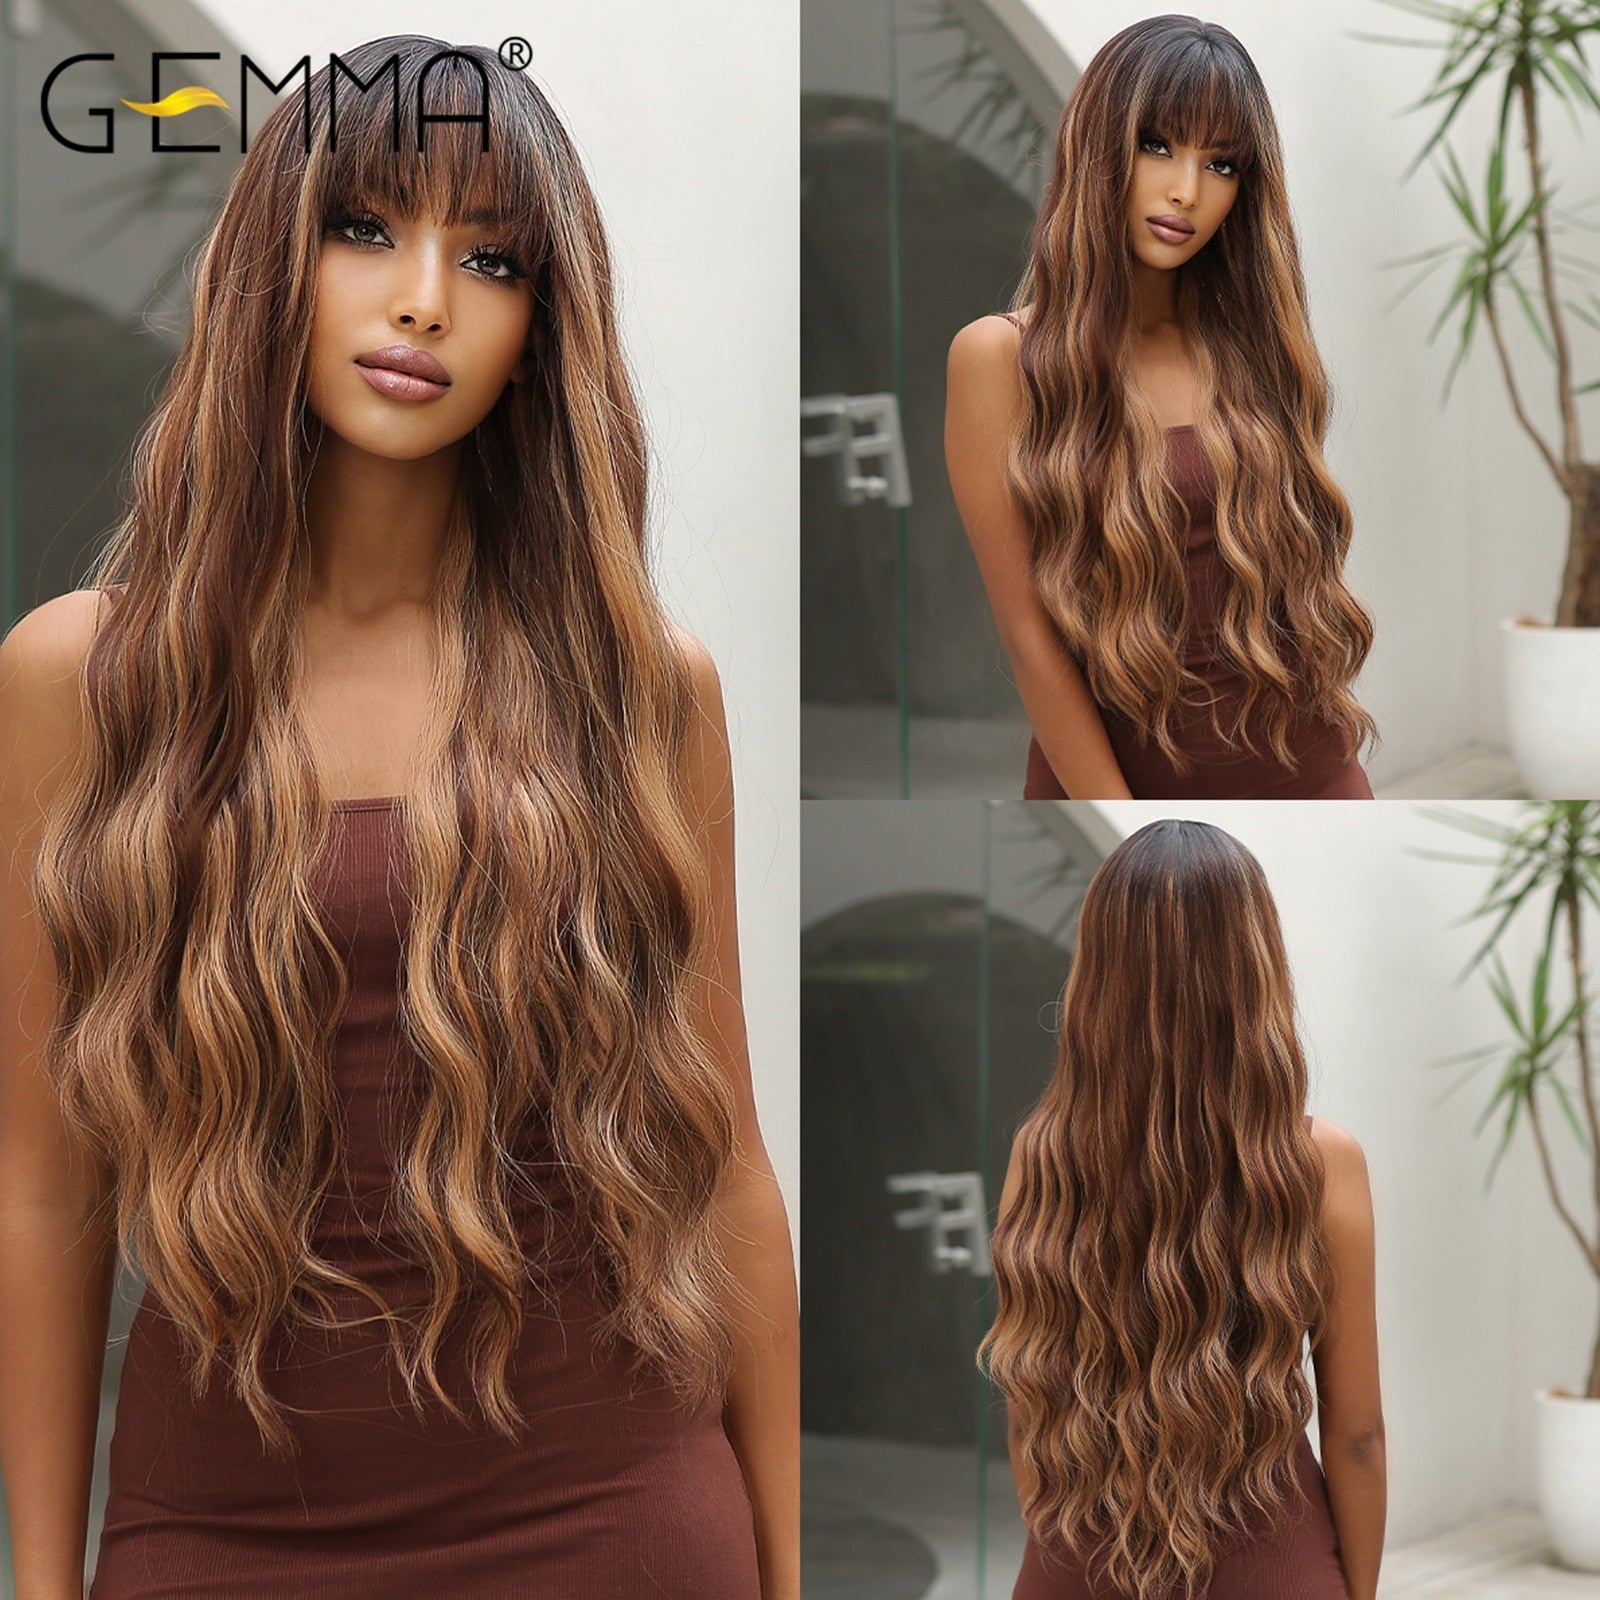 GEMMA Long Wavy Ombre Brown Purple Synthetic Wigs Heat Resistant Natural Middle Part Cosplay Party Lolita Hair Wigs